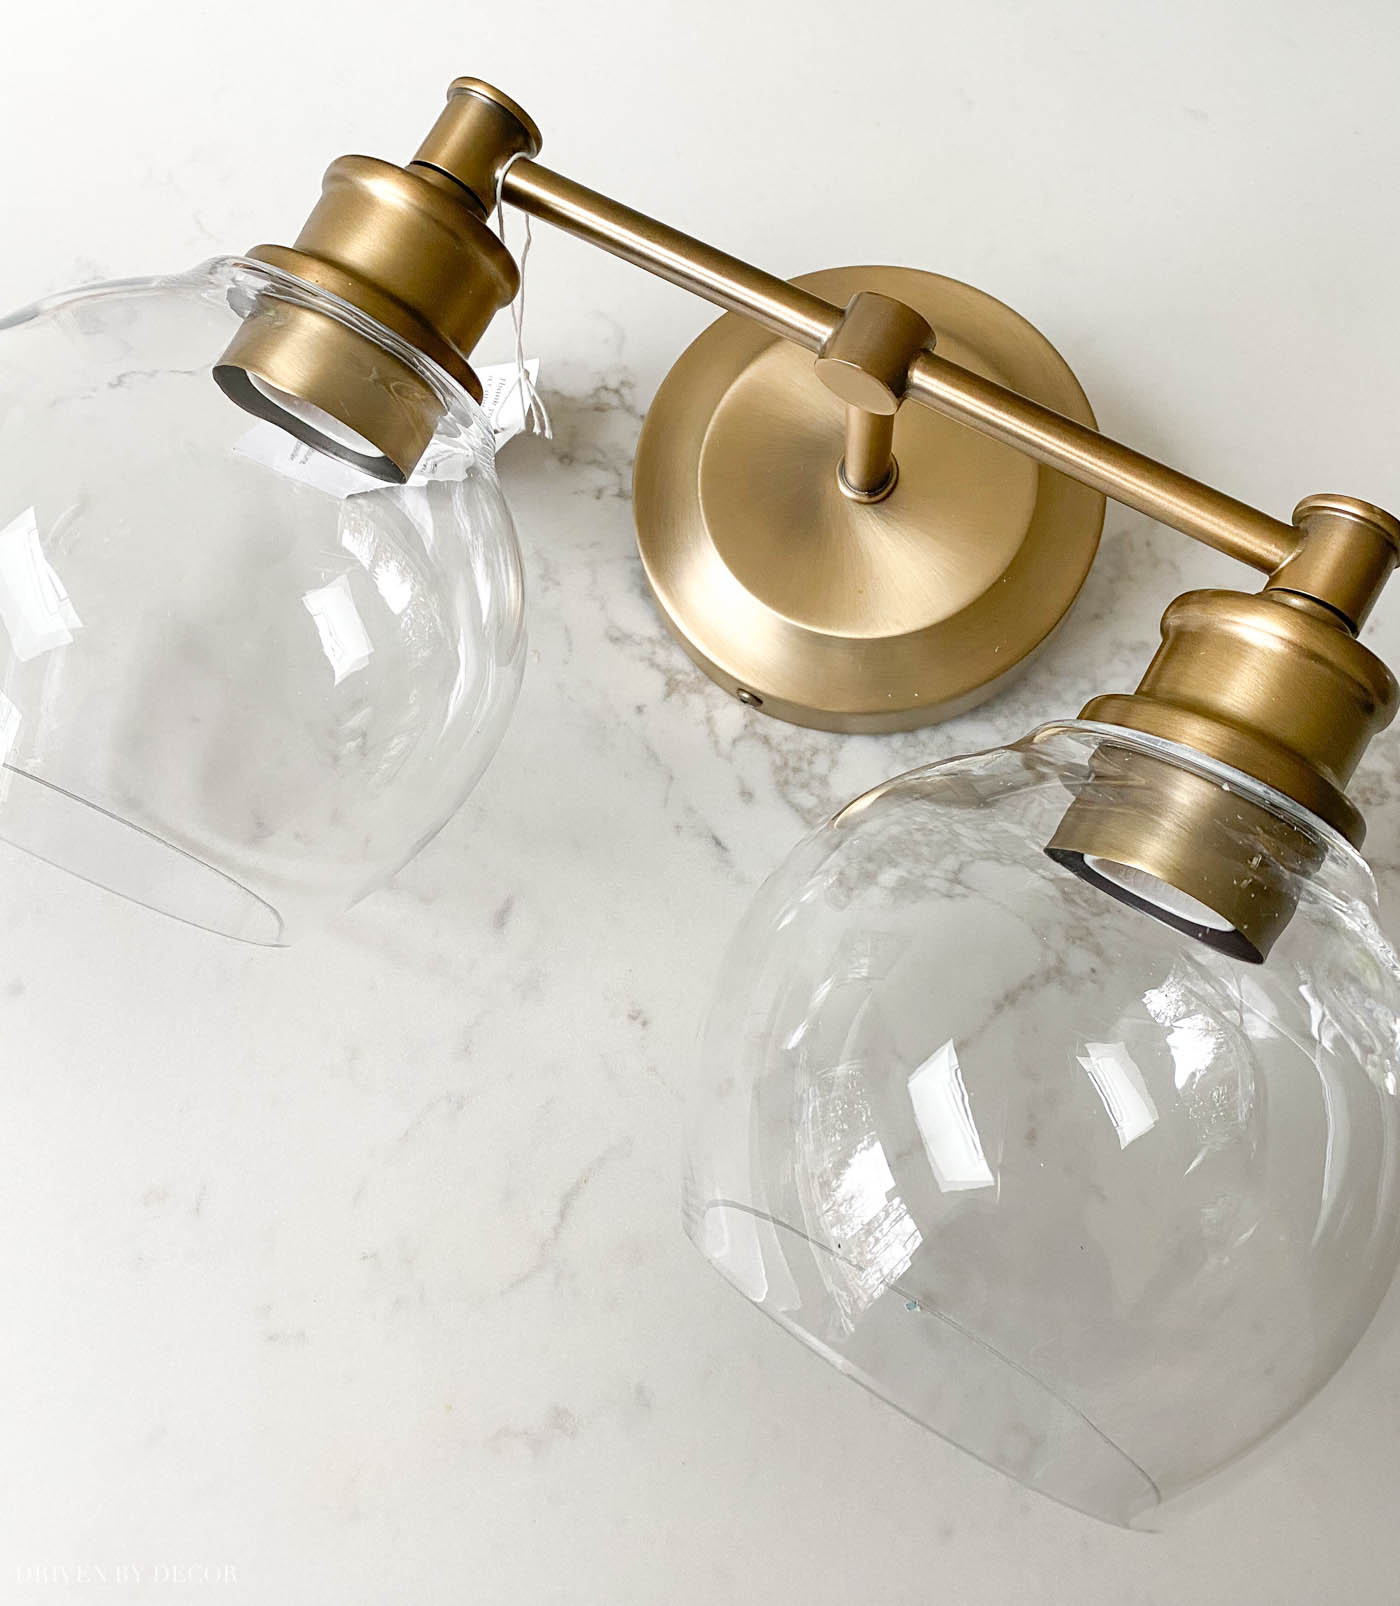 Love these two-light brass globe lights for over a bathroom vanity mirror!